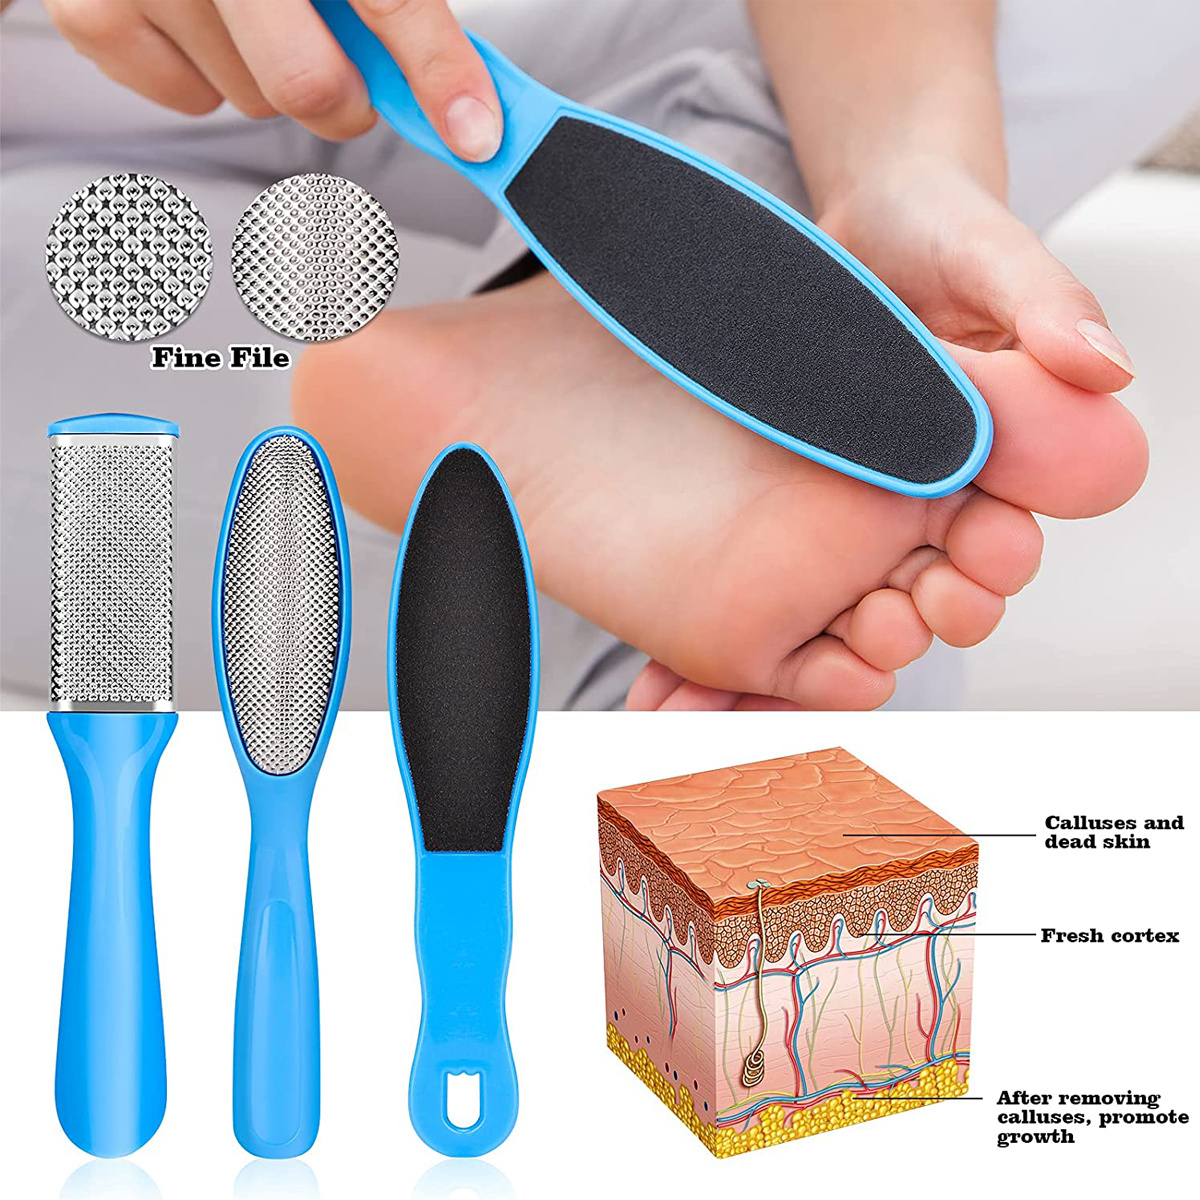 How To Use A Foot File - DIY Foot Care For Men To Guarantee Callus Removal  and Exfoliation 